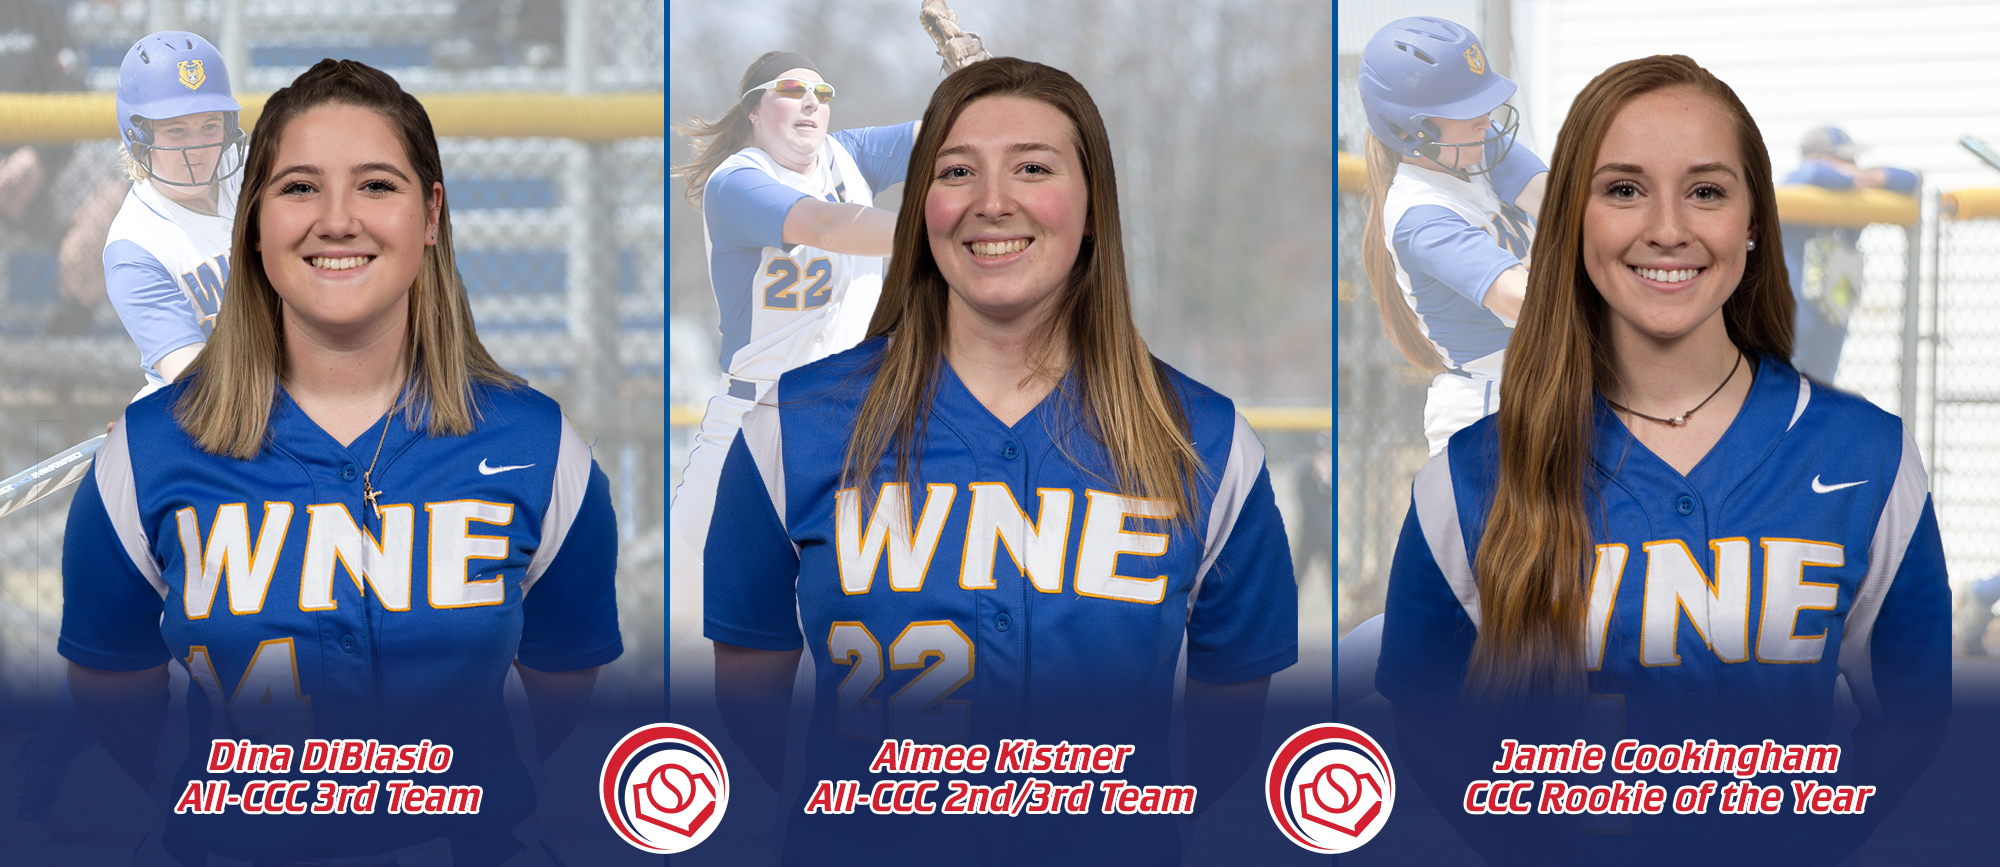 Cookingham Named CCC Rookie of the Year, Kistner & DiBlasio Earn All-CCC Accolades